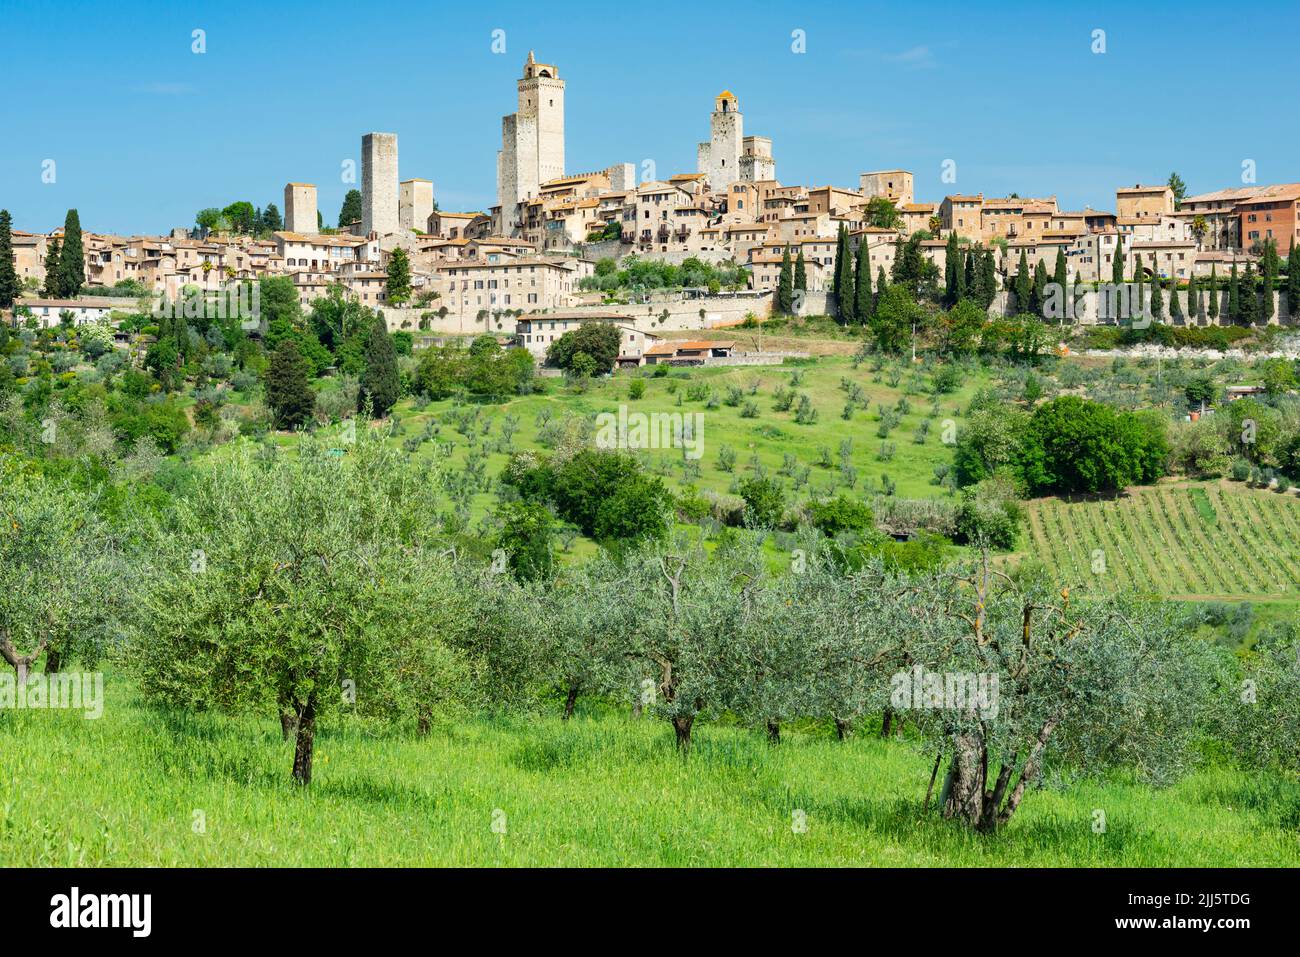 Italy, Tuscany, San Gimignano, Summer orchard with medieval town in background Stock Photo